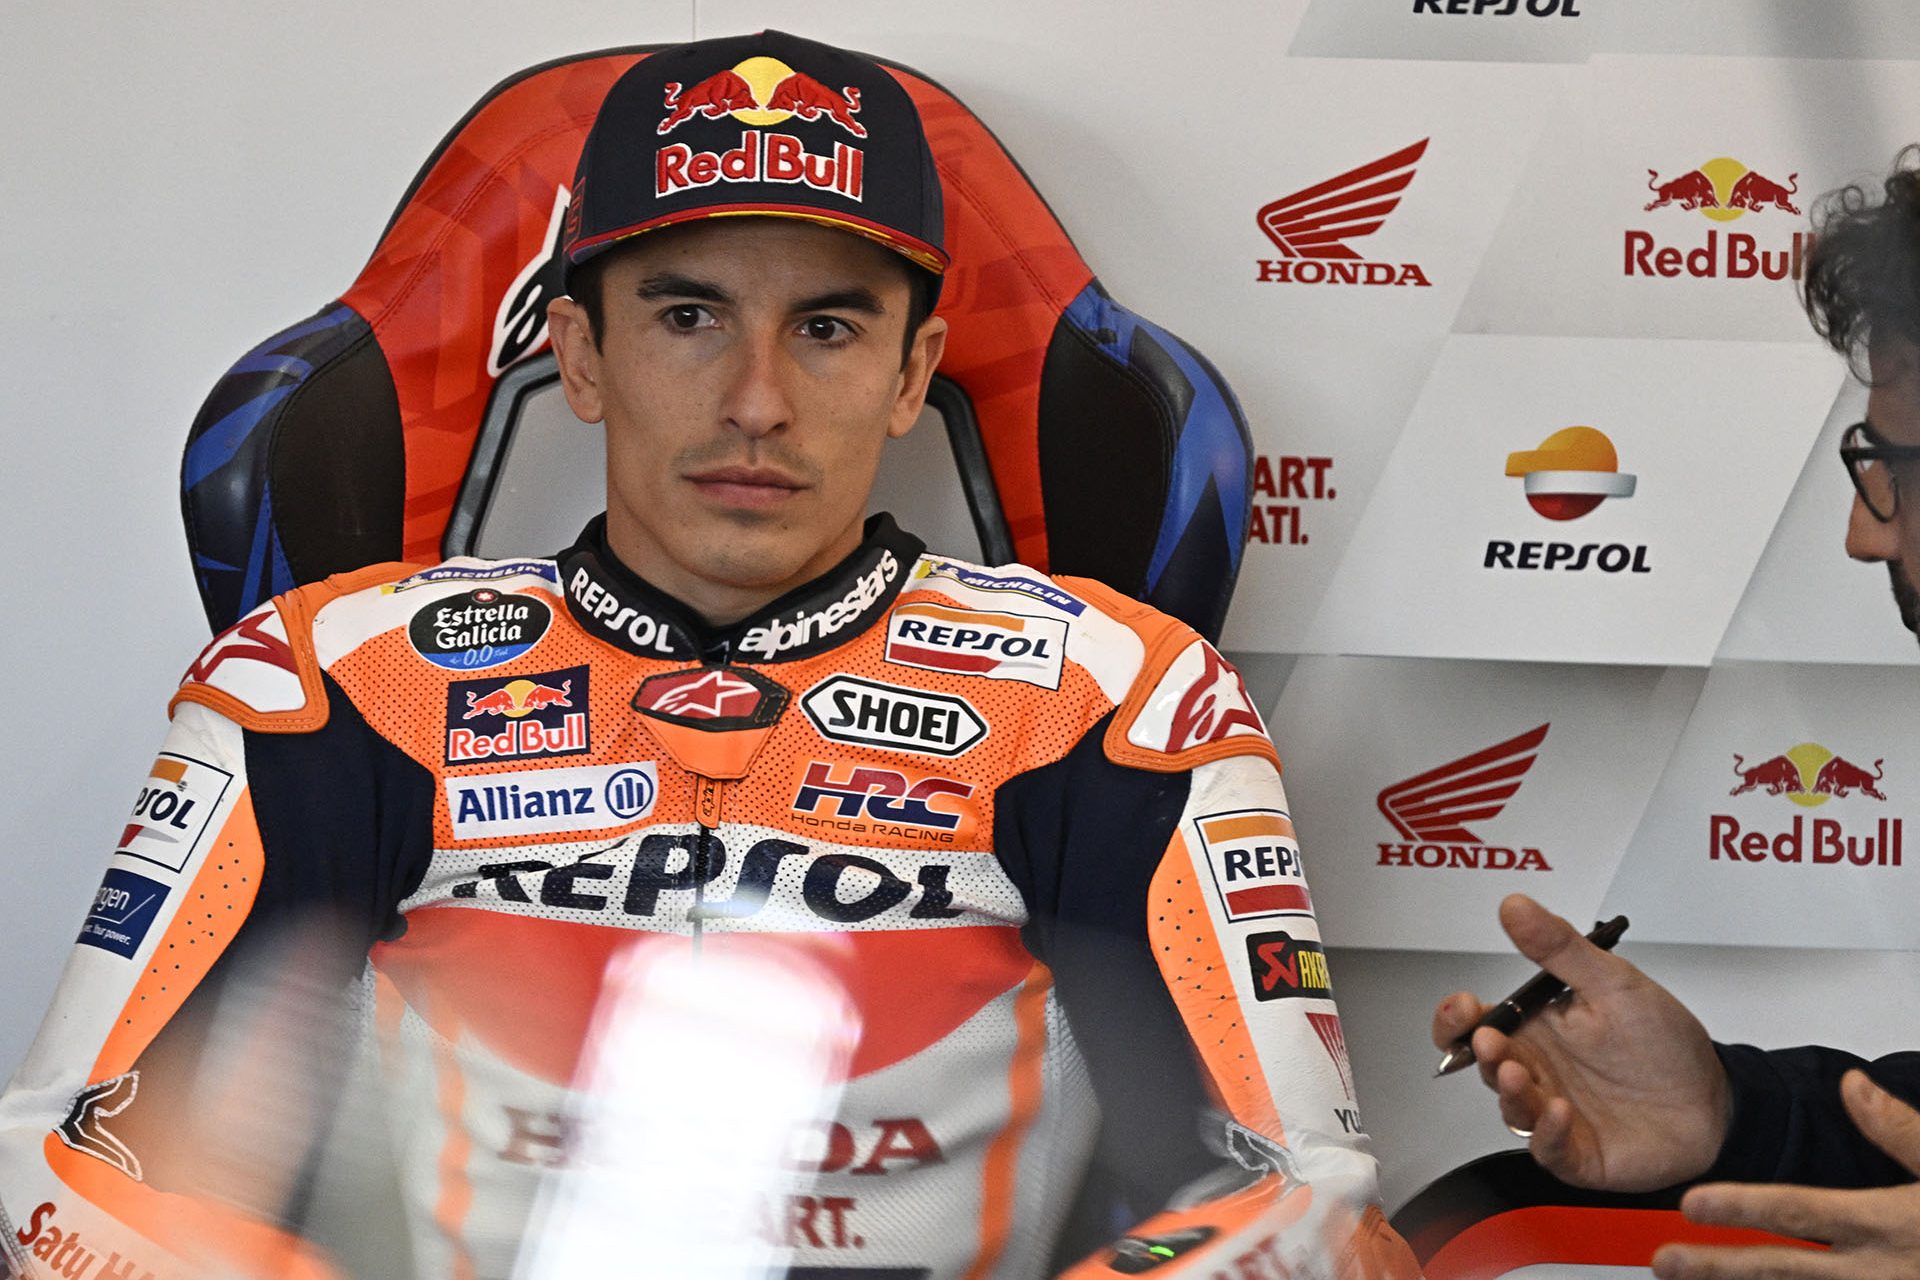 Motorcycling: What a year for Marc Márquez